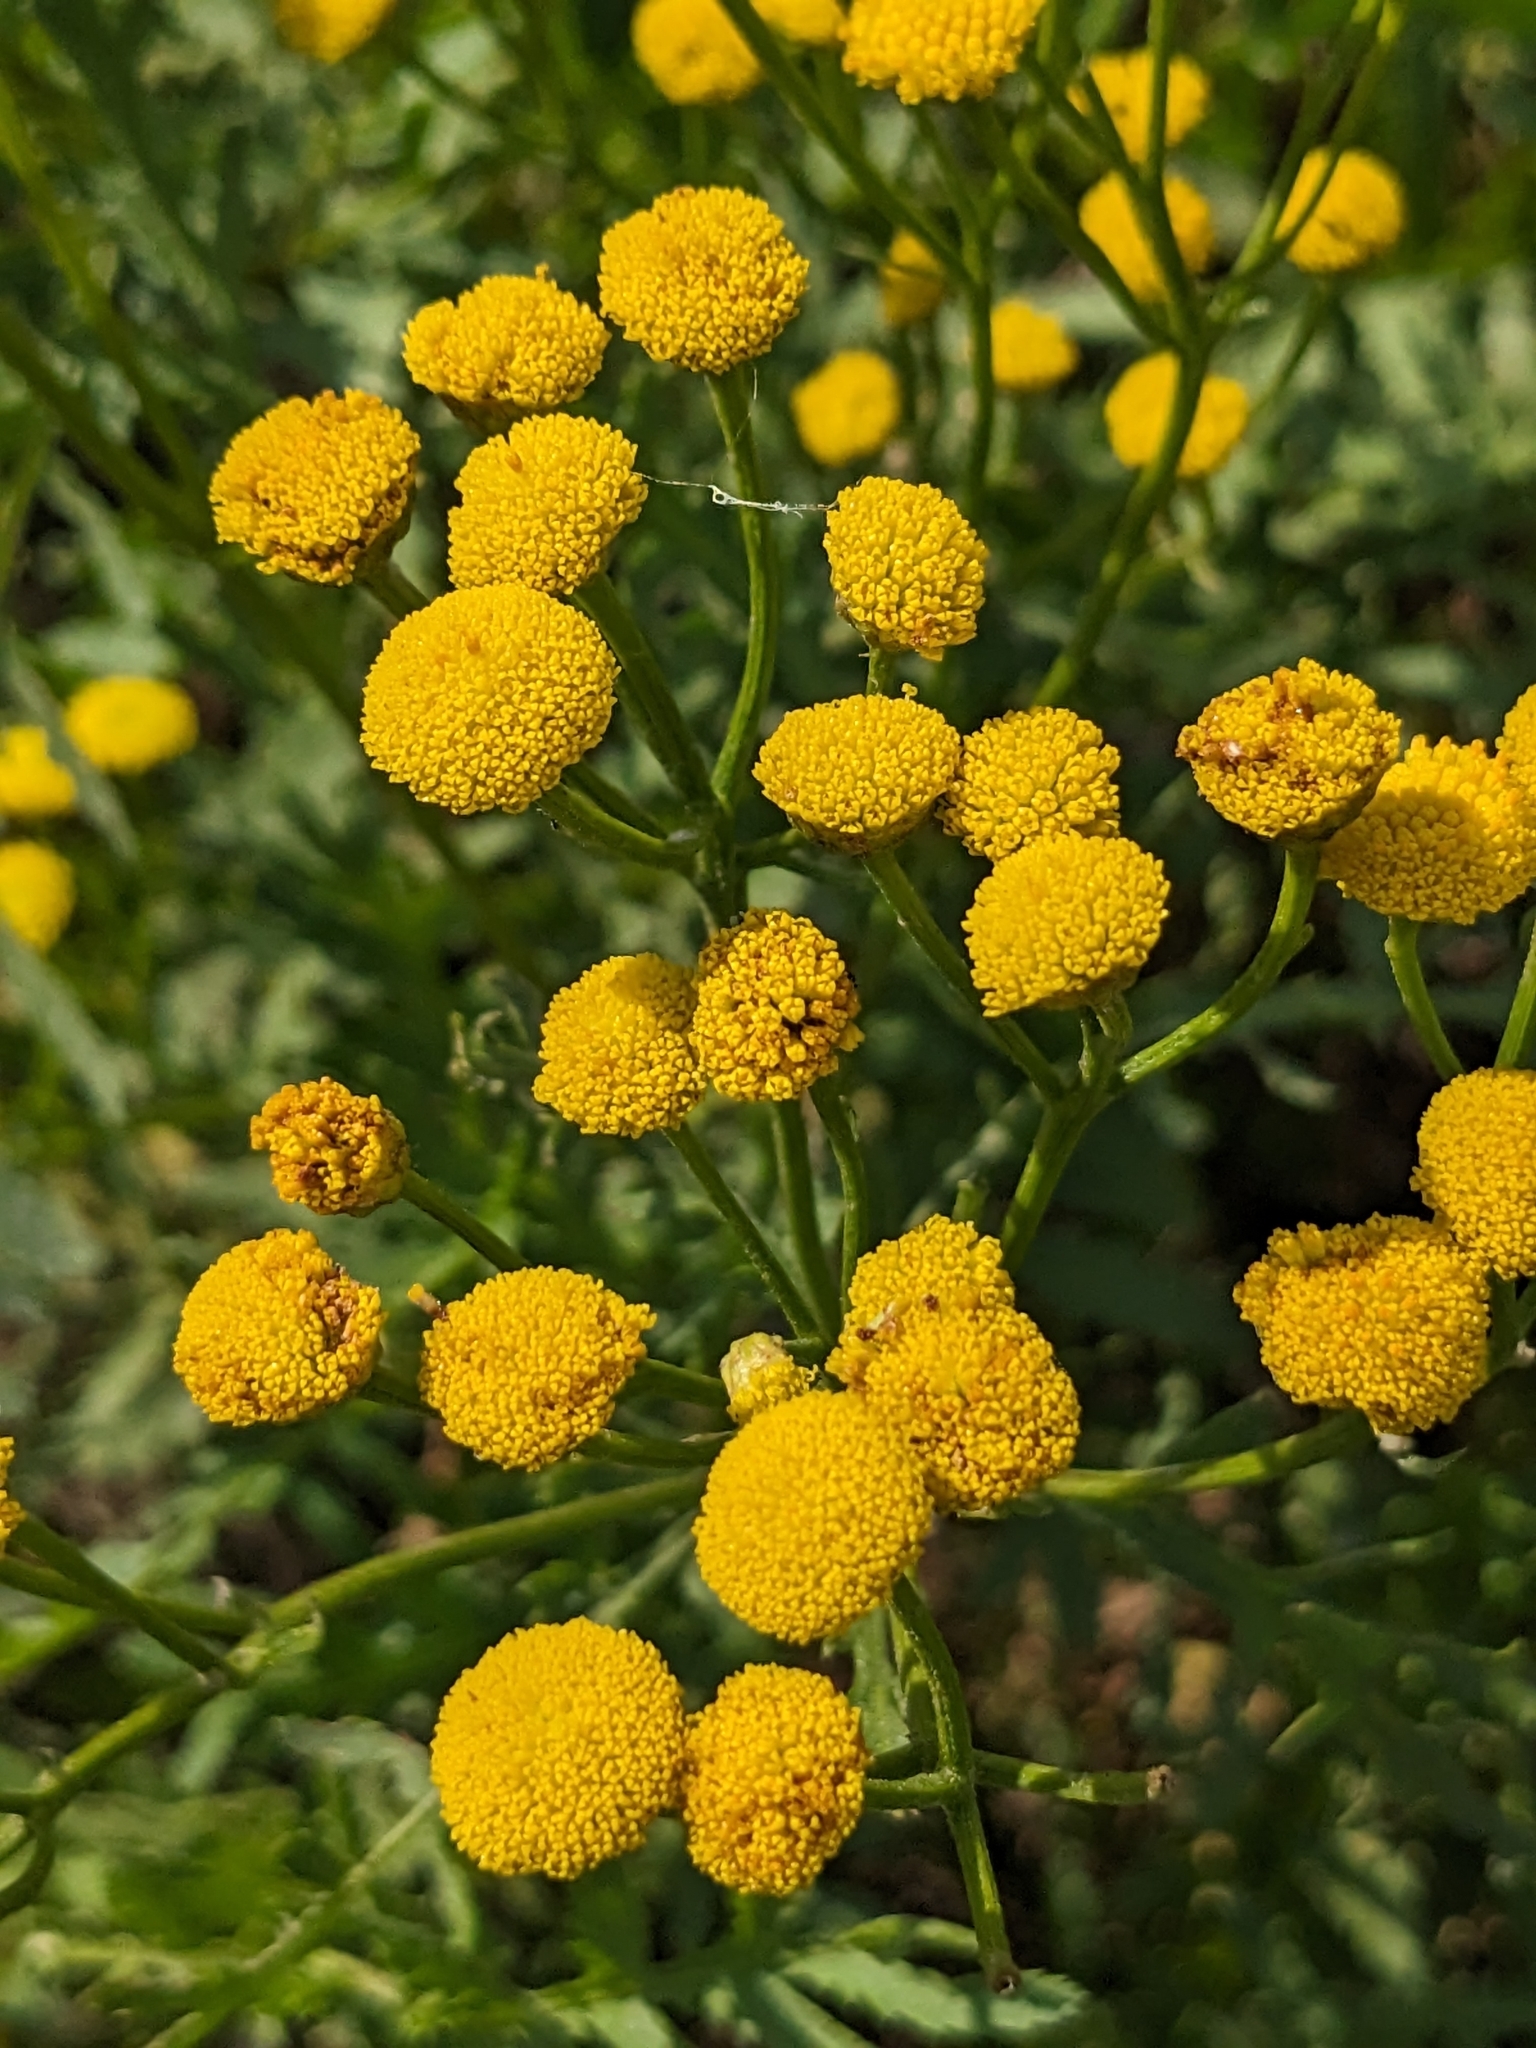 Many yellow tansy flowers, pictured from above